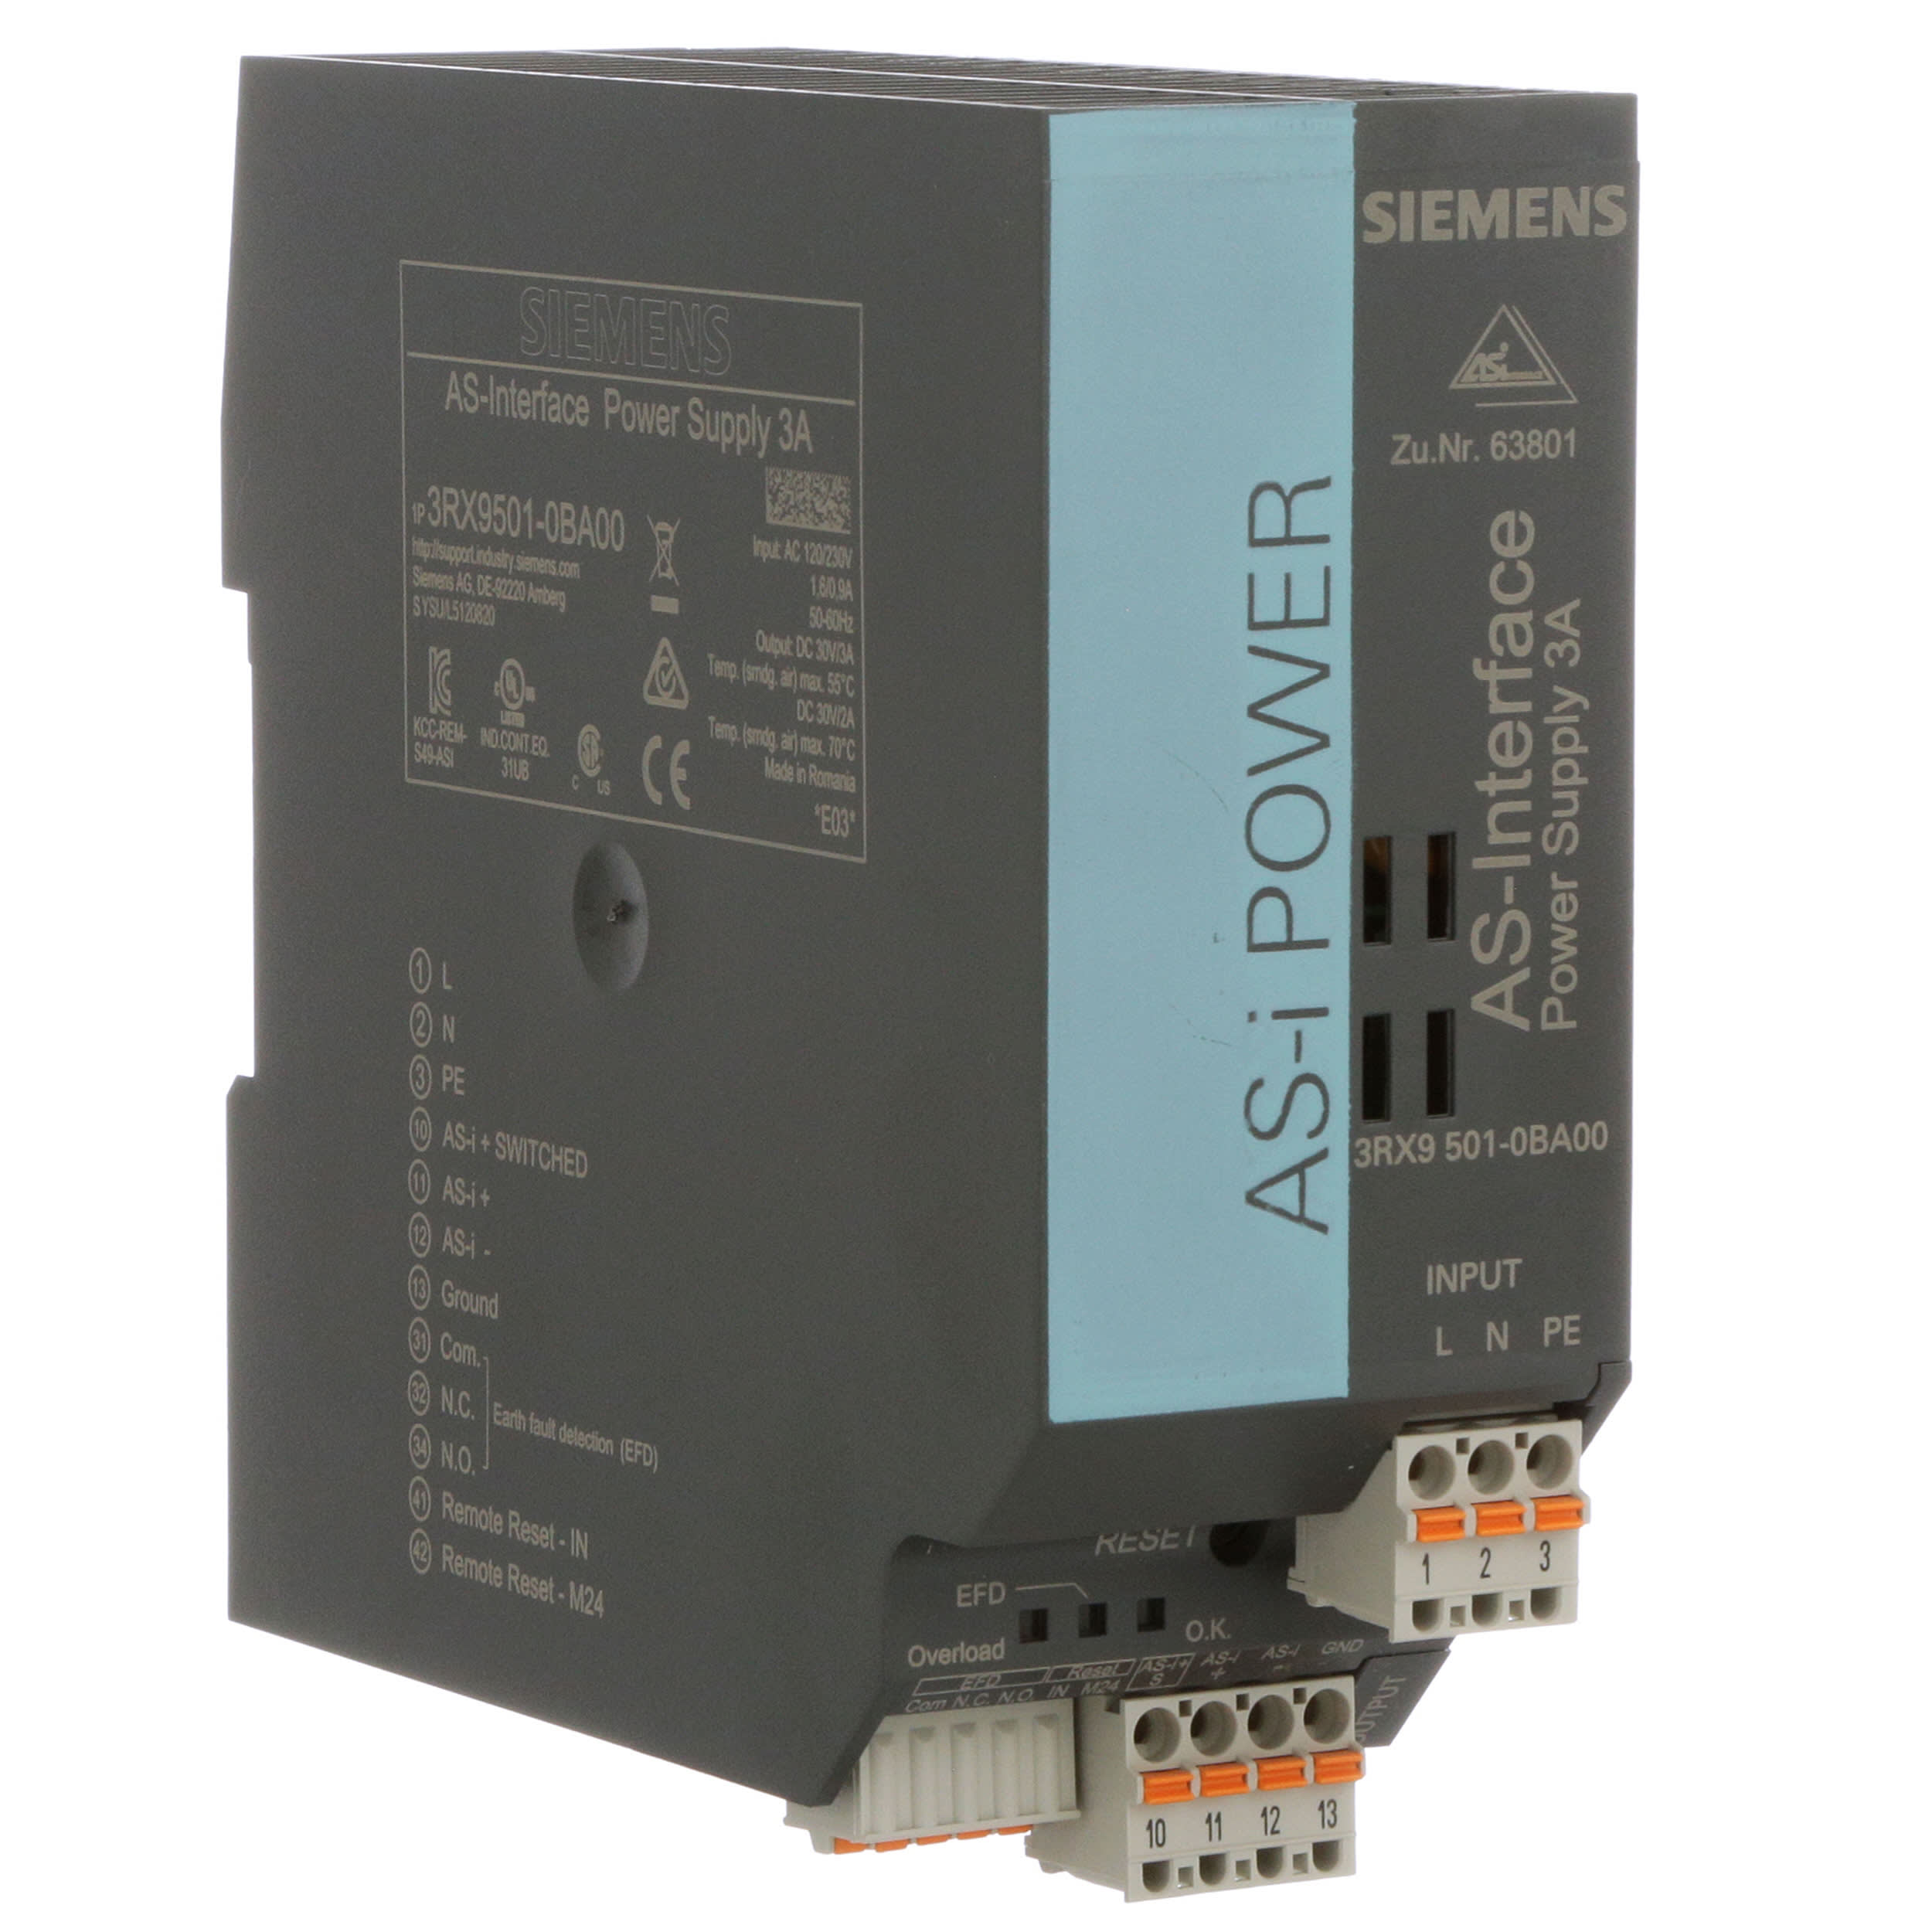 1pc Siemens Power Module 3rx9501-0ba00 1 Year Fast Delivery for sale online 